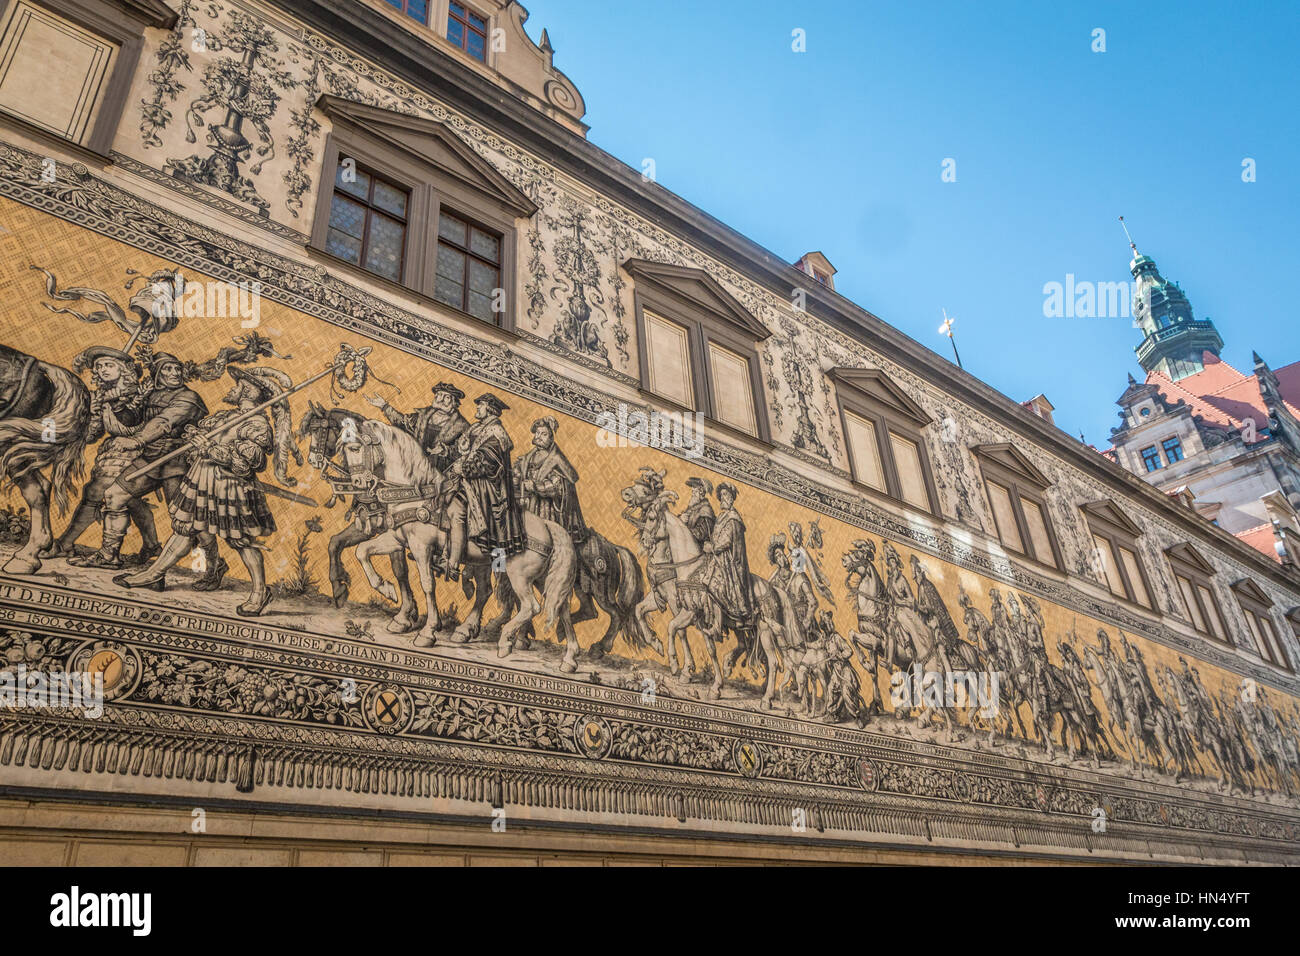 Procession of Princes mural in Dresden Germany Stock Photo